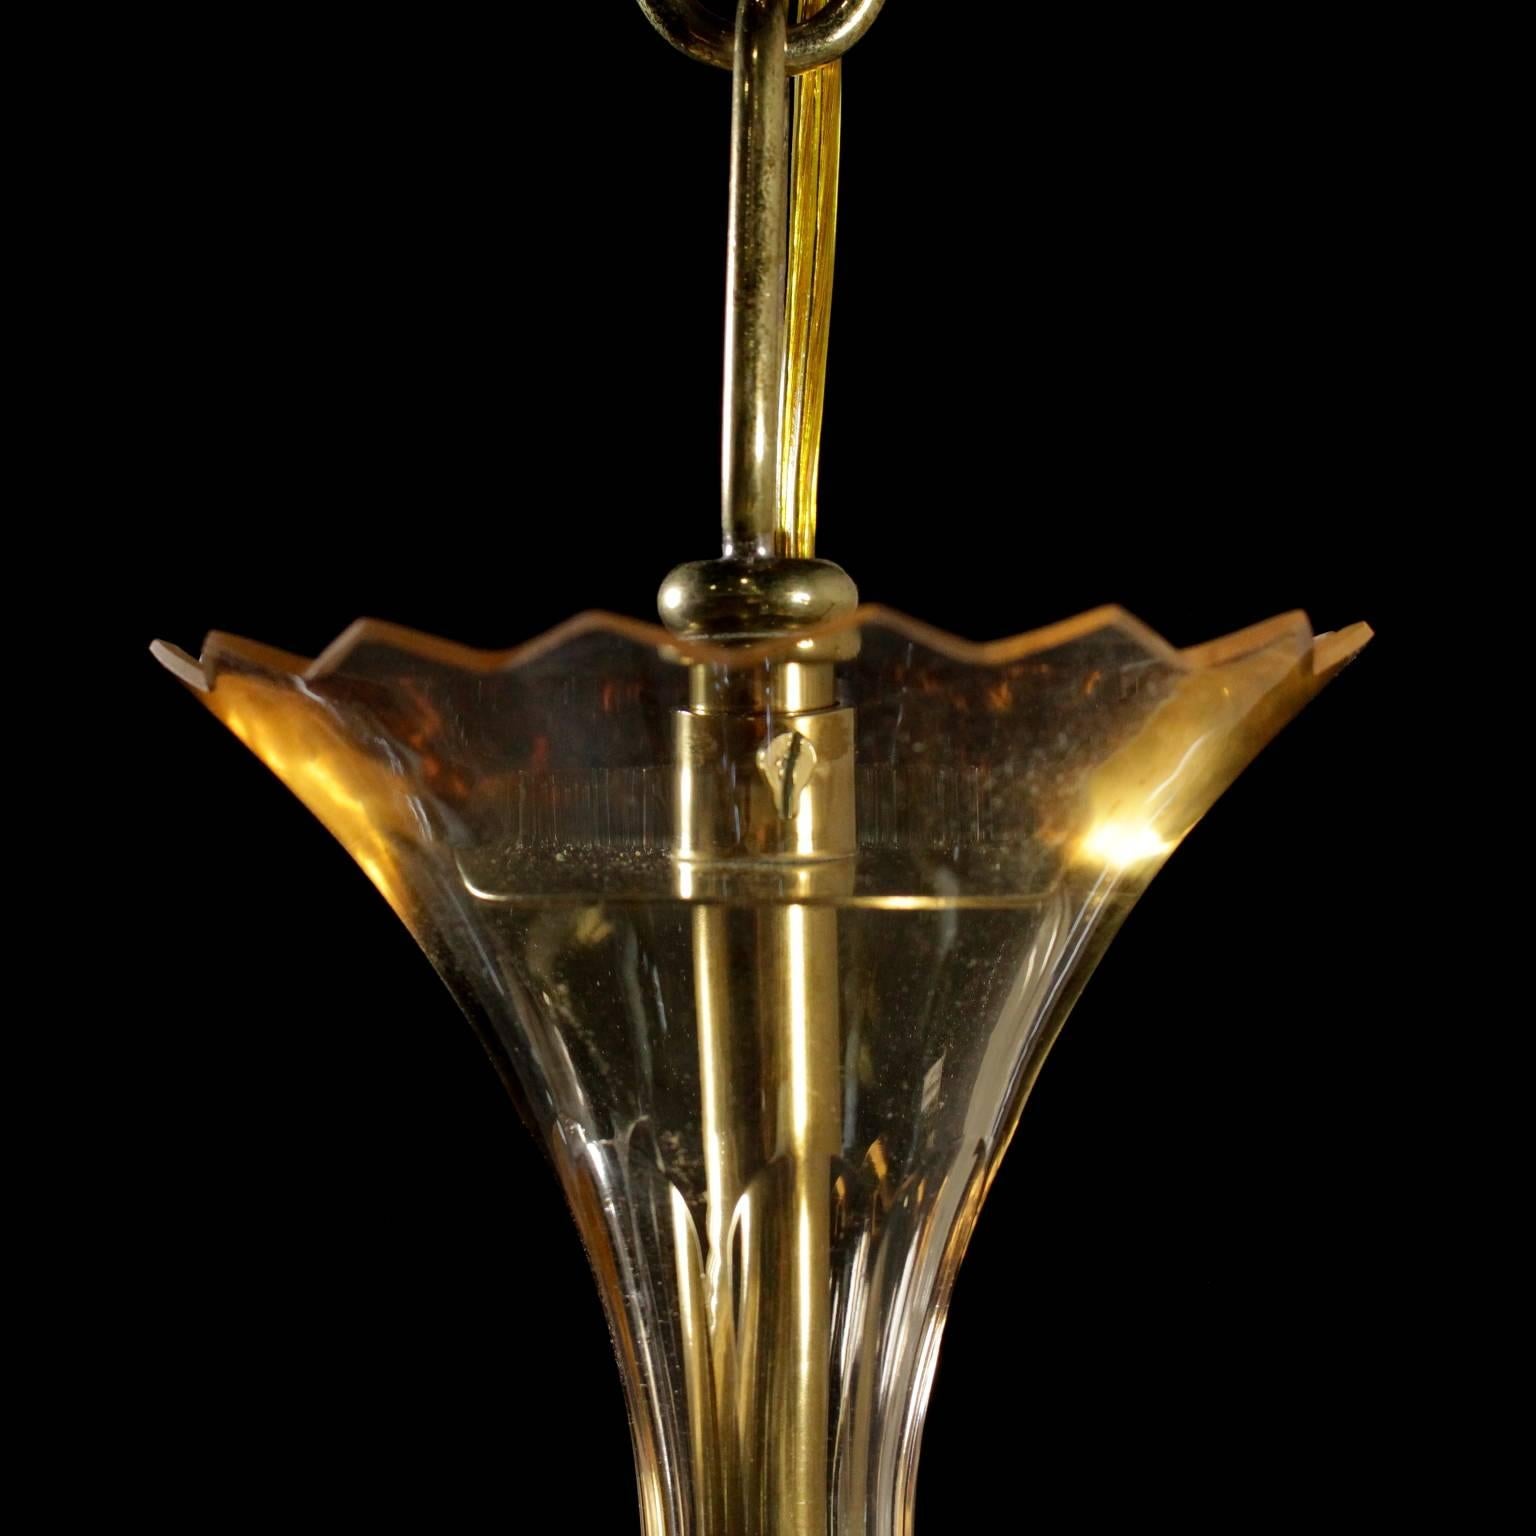 Mid-Century Modern Blown Glass Hanging Lamp Vintage Manufactured in Italy, 1940s-1950s